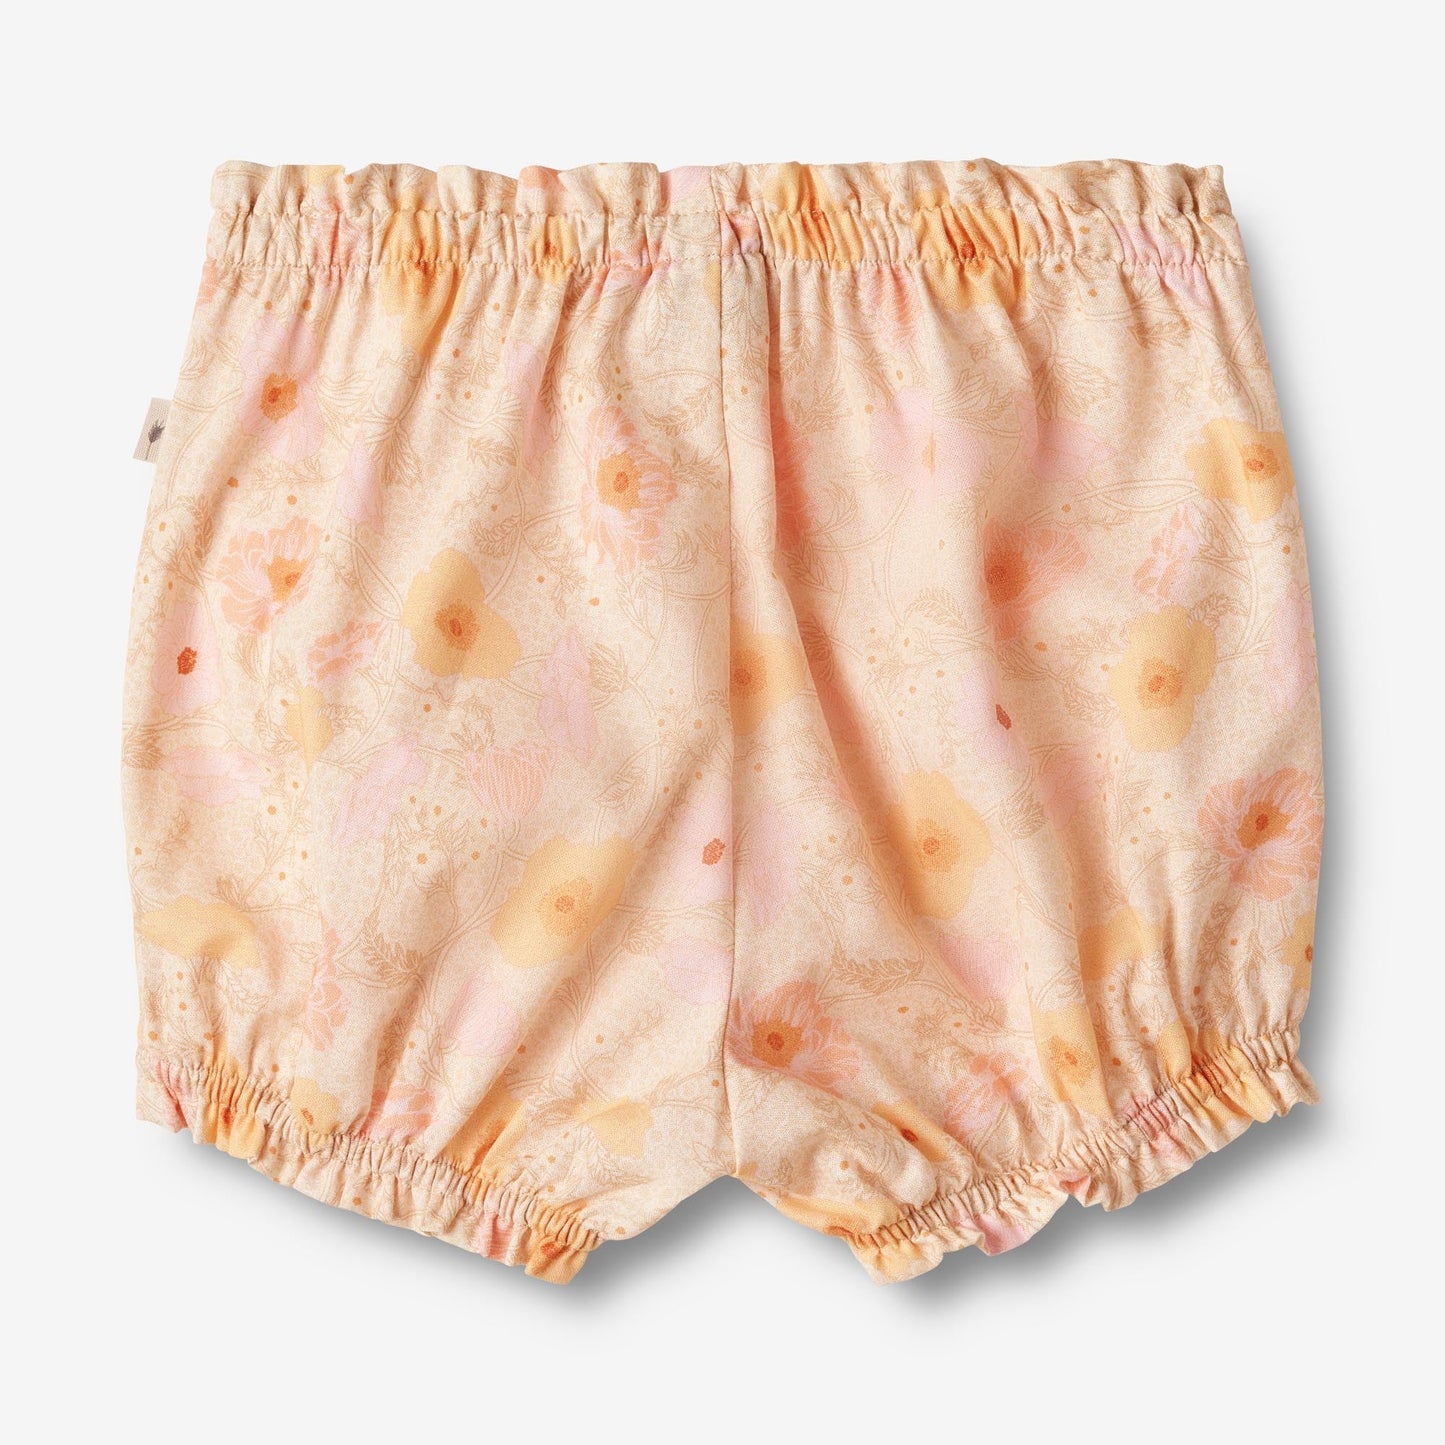 Wheat 'Angie' Baby Nappy Pants - Alabaster Flower Bobbles